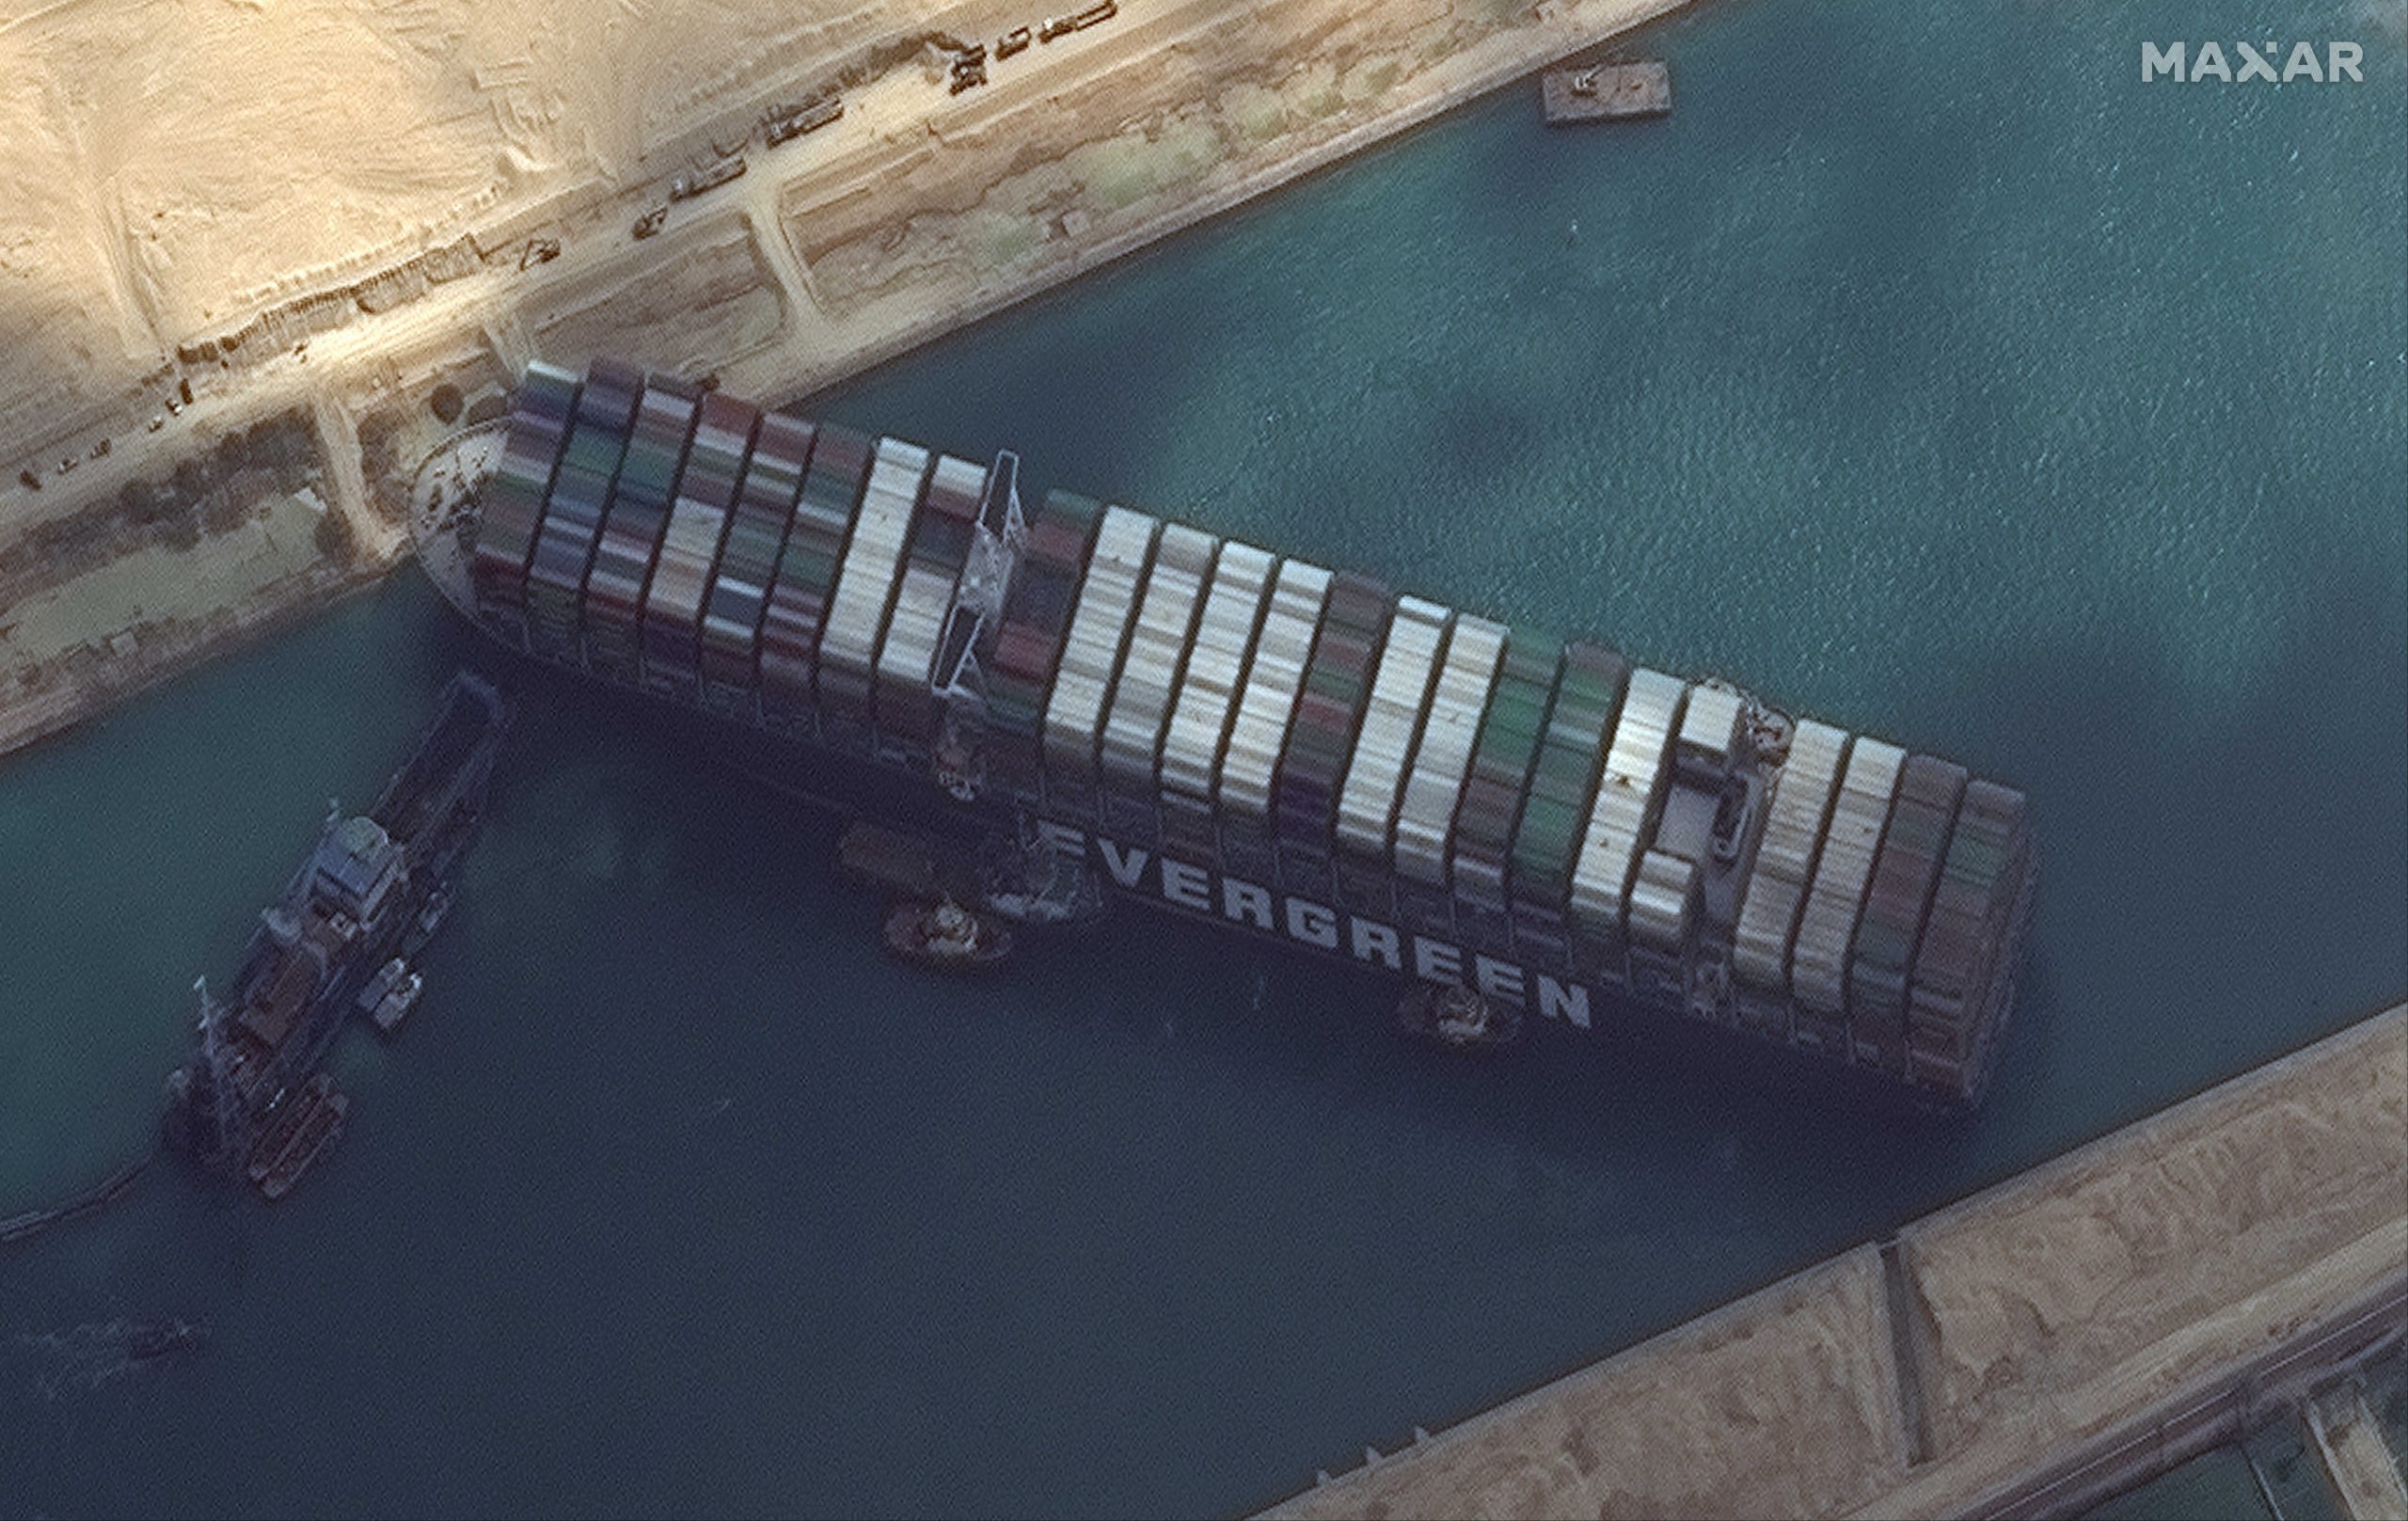 Suez Canal crisis: All we know about the blockage in the world’s largest man-made canal